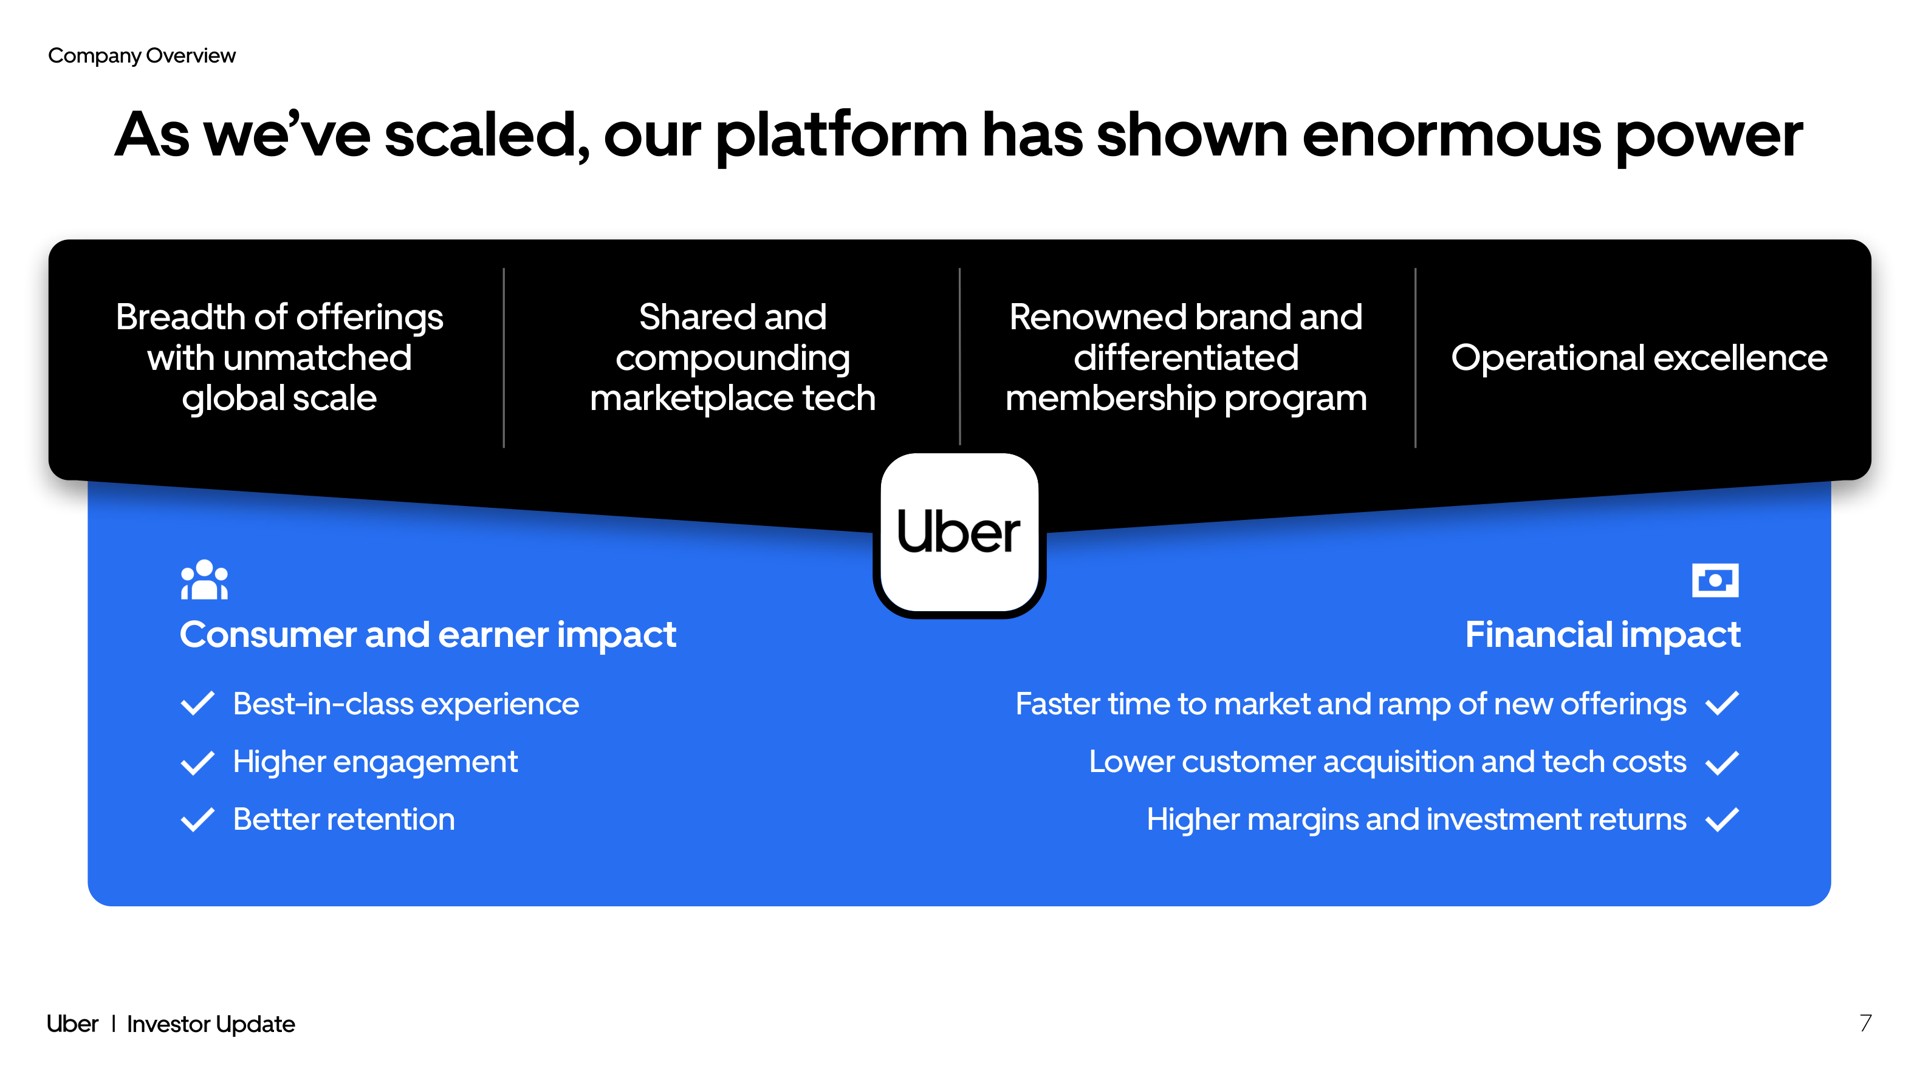 as we scaled our platform has shown enormous power breadth of offerings with unmatched global scale shared and compounding tech renowned brand and differentiated membership program operational excellence consumer and earner impact financial impact | Uber